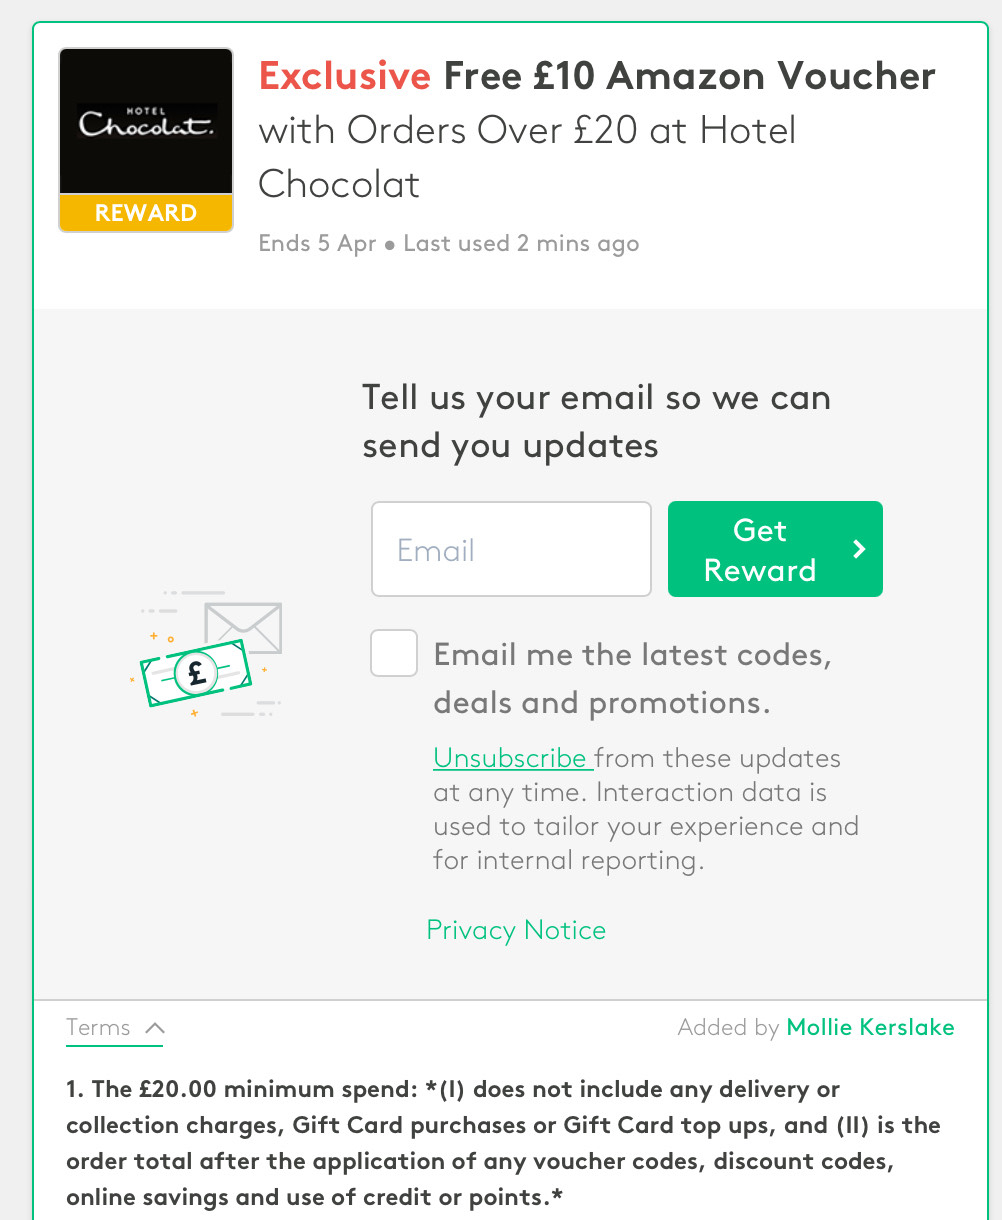 Free 10 Amazon Gift Card With Orders Over Free Delivery When Spending 30 Hotel Chocolat Through Vouchercodes Hotukdeals